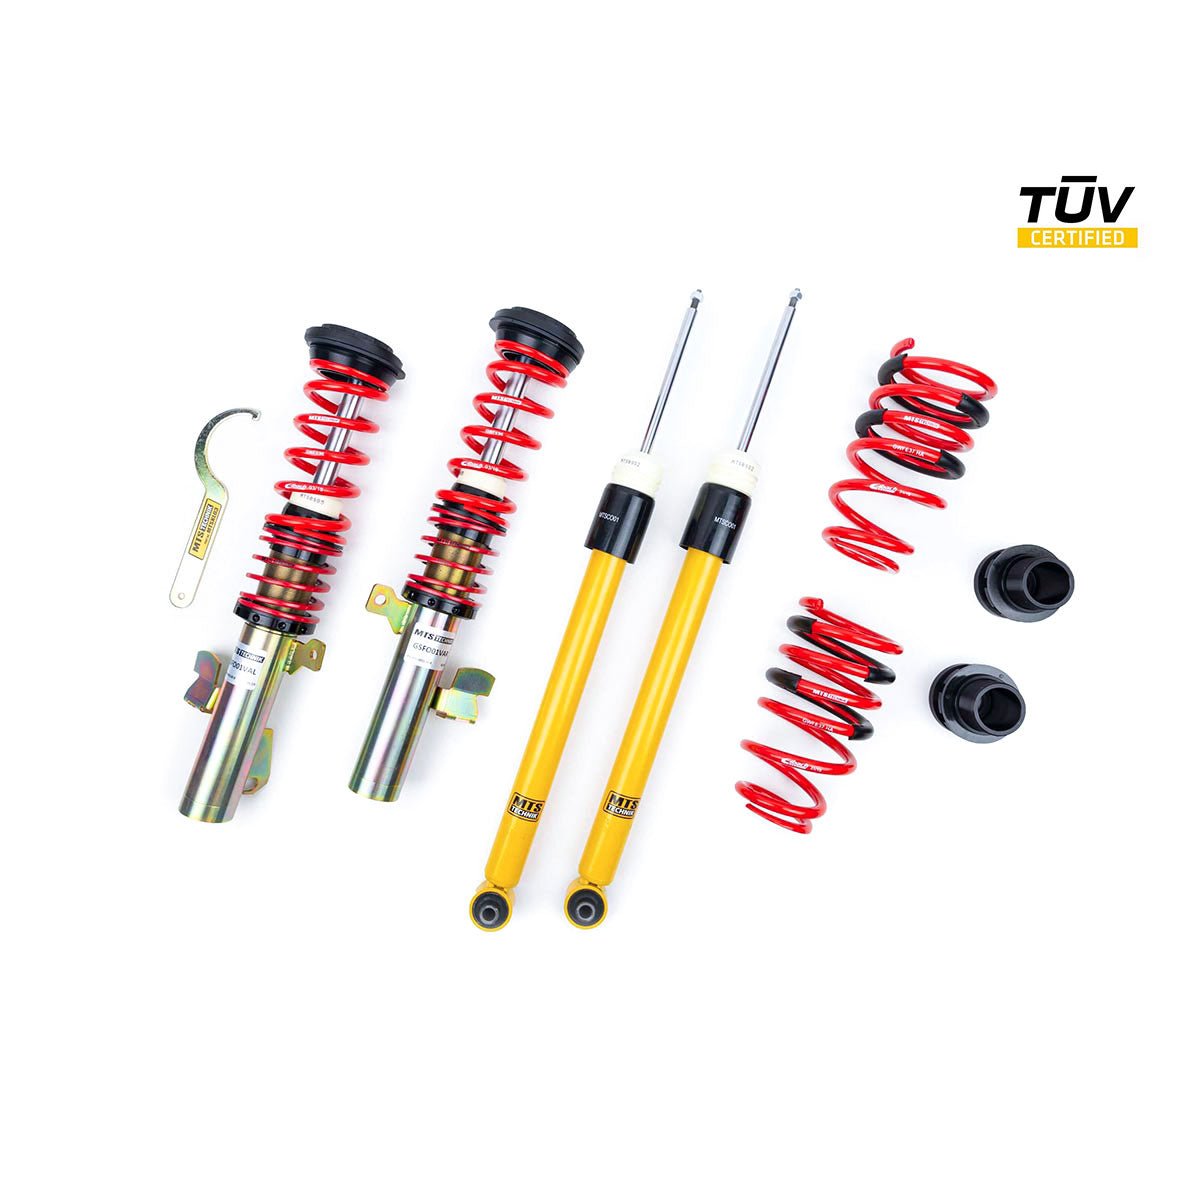 MTS TECHNIK coilover kit STREET Ford Focus MK2 Cabrio (with TÜV) - PARTS33 GmbH